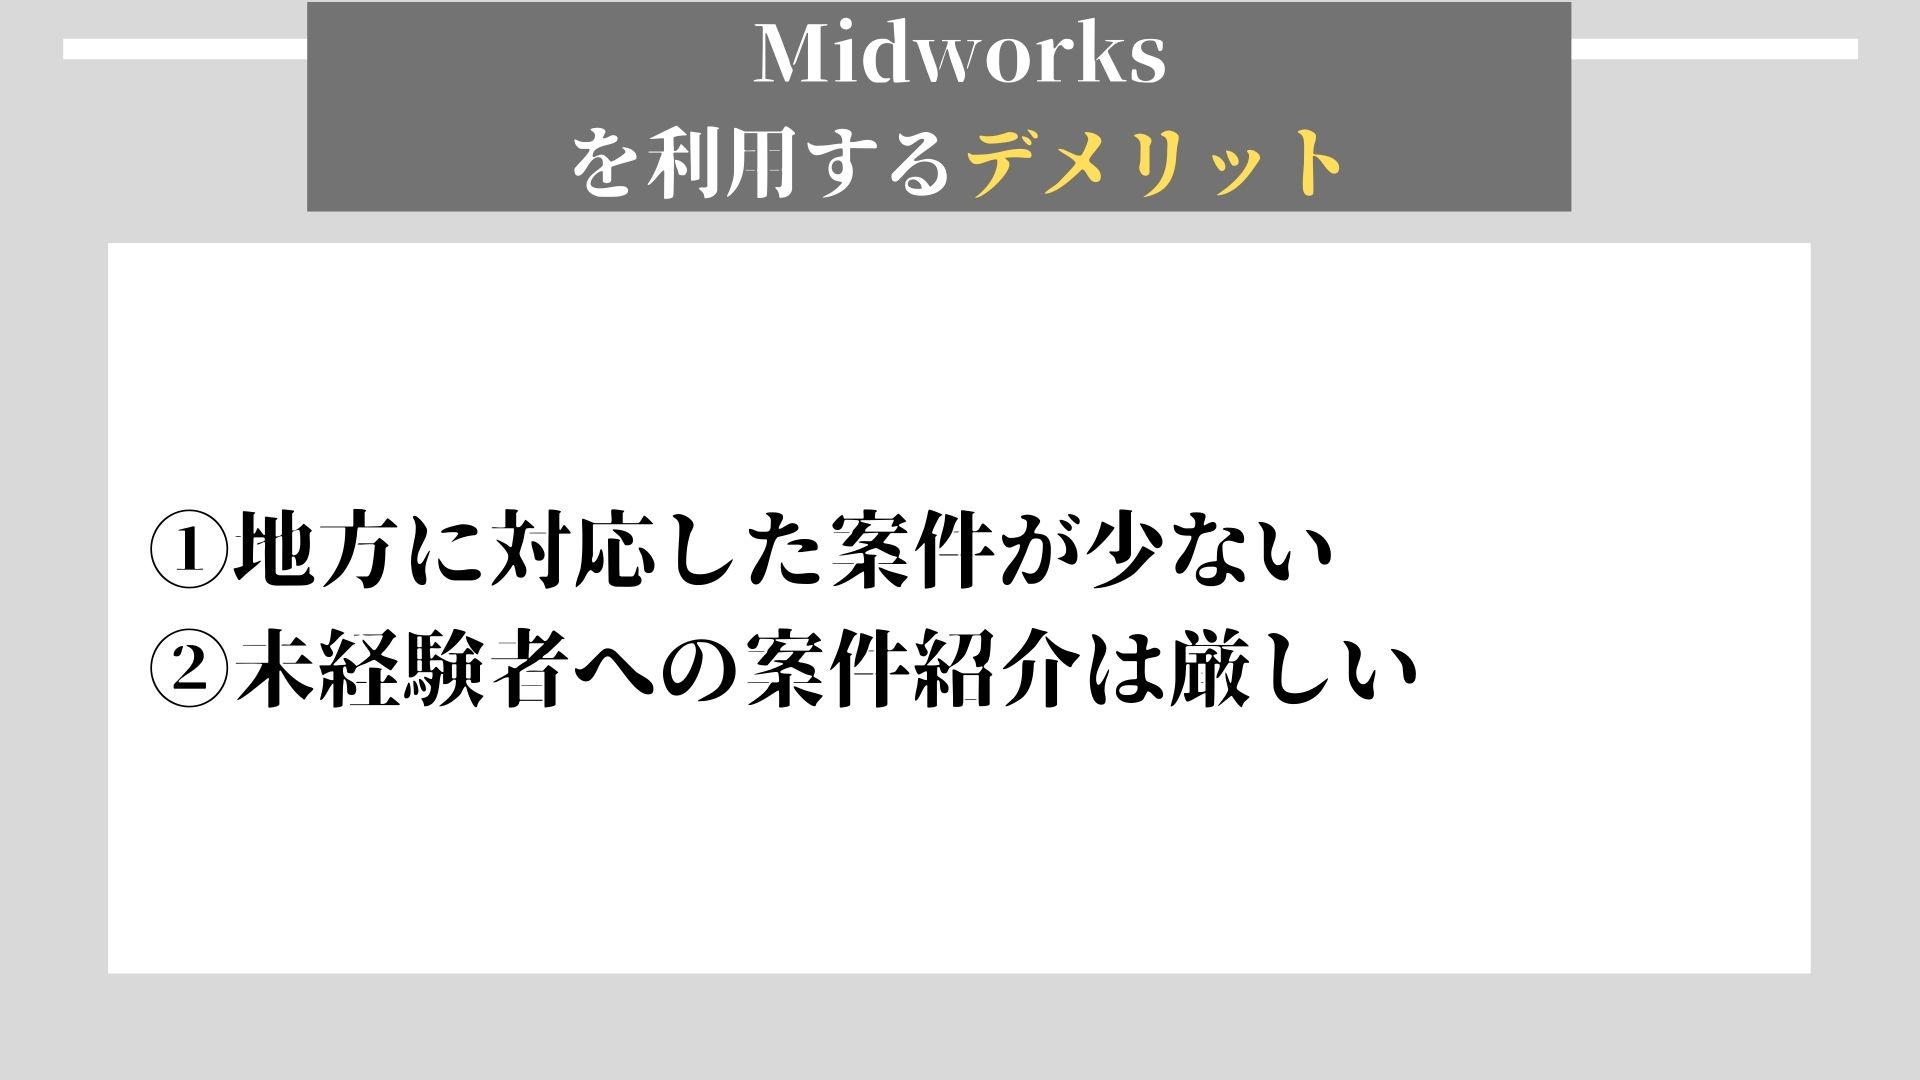 Midworks　デメリット